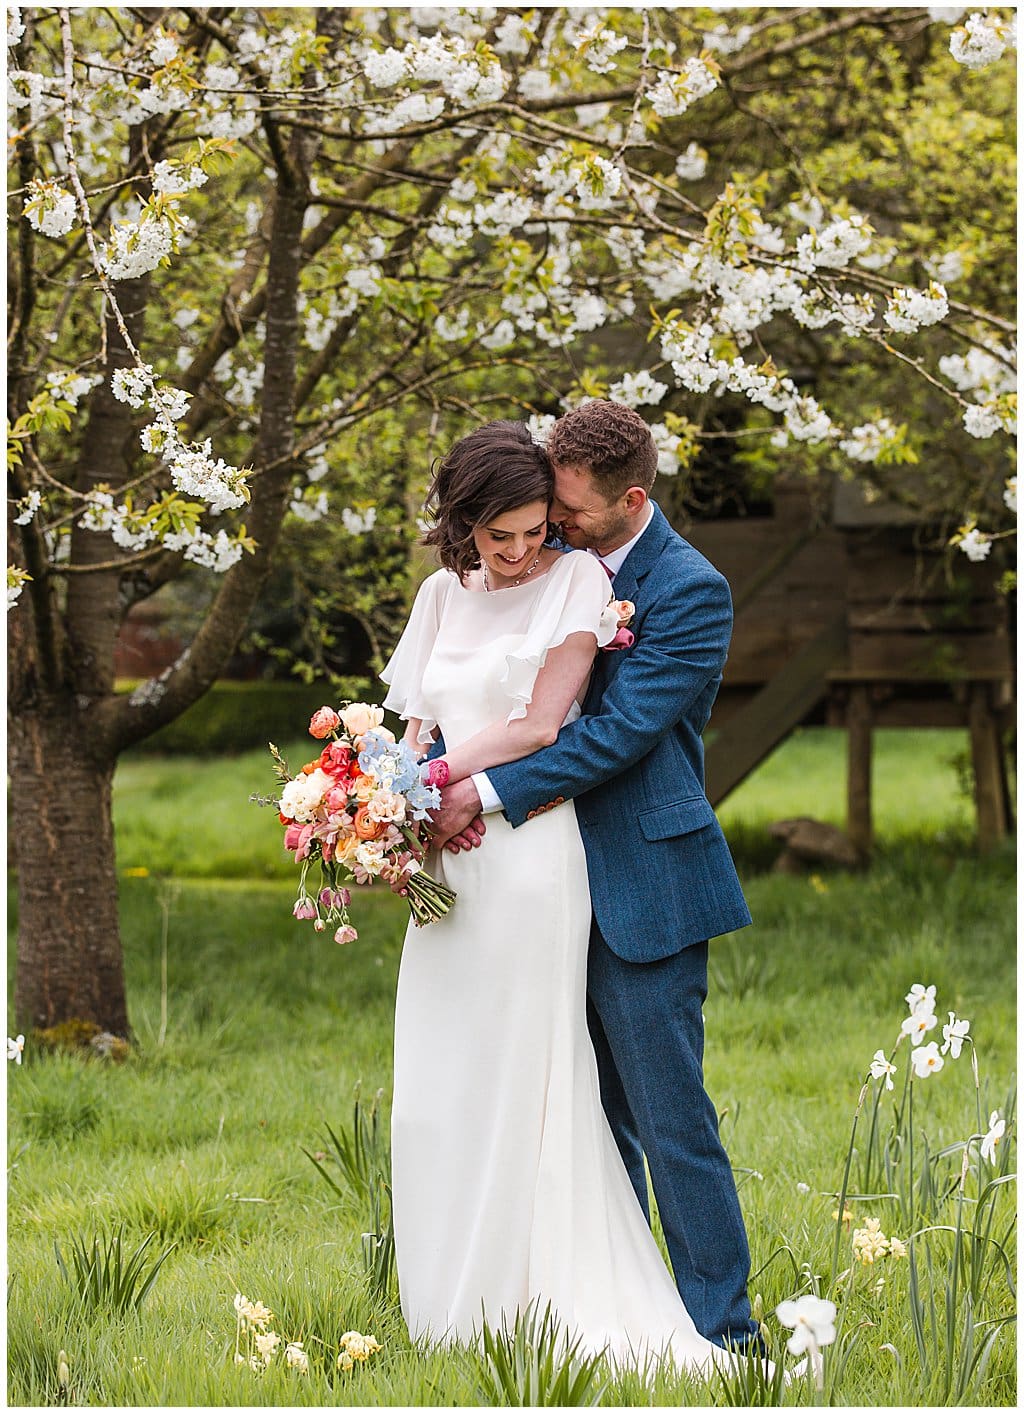 Bride and Groom cuddle in front of spring blossom trees in Pimhill Barn gardens